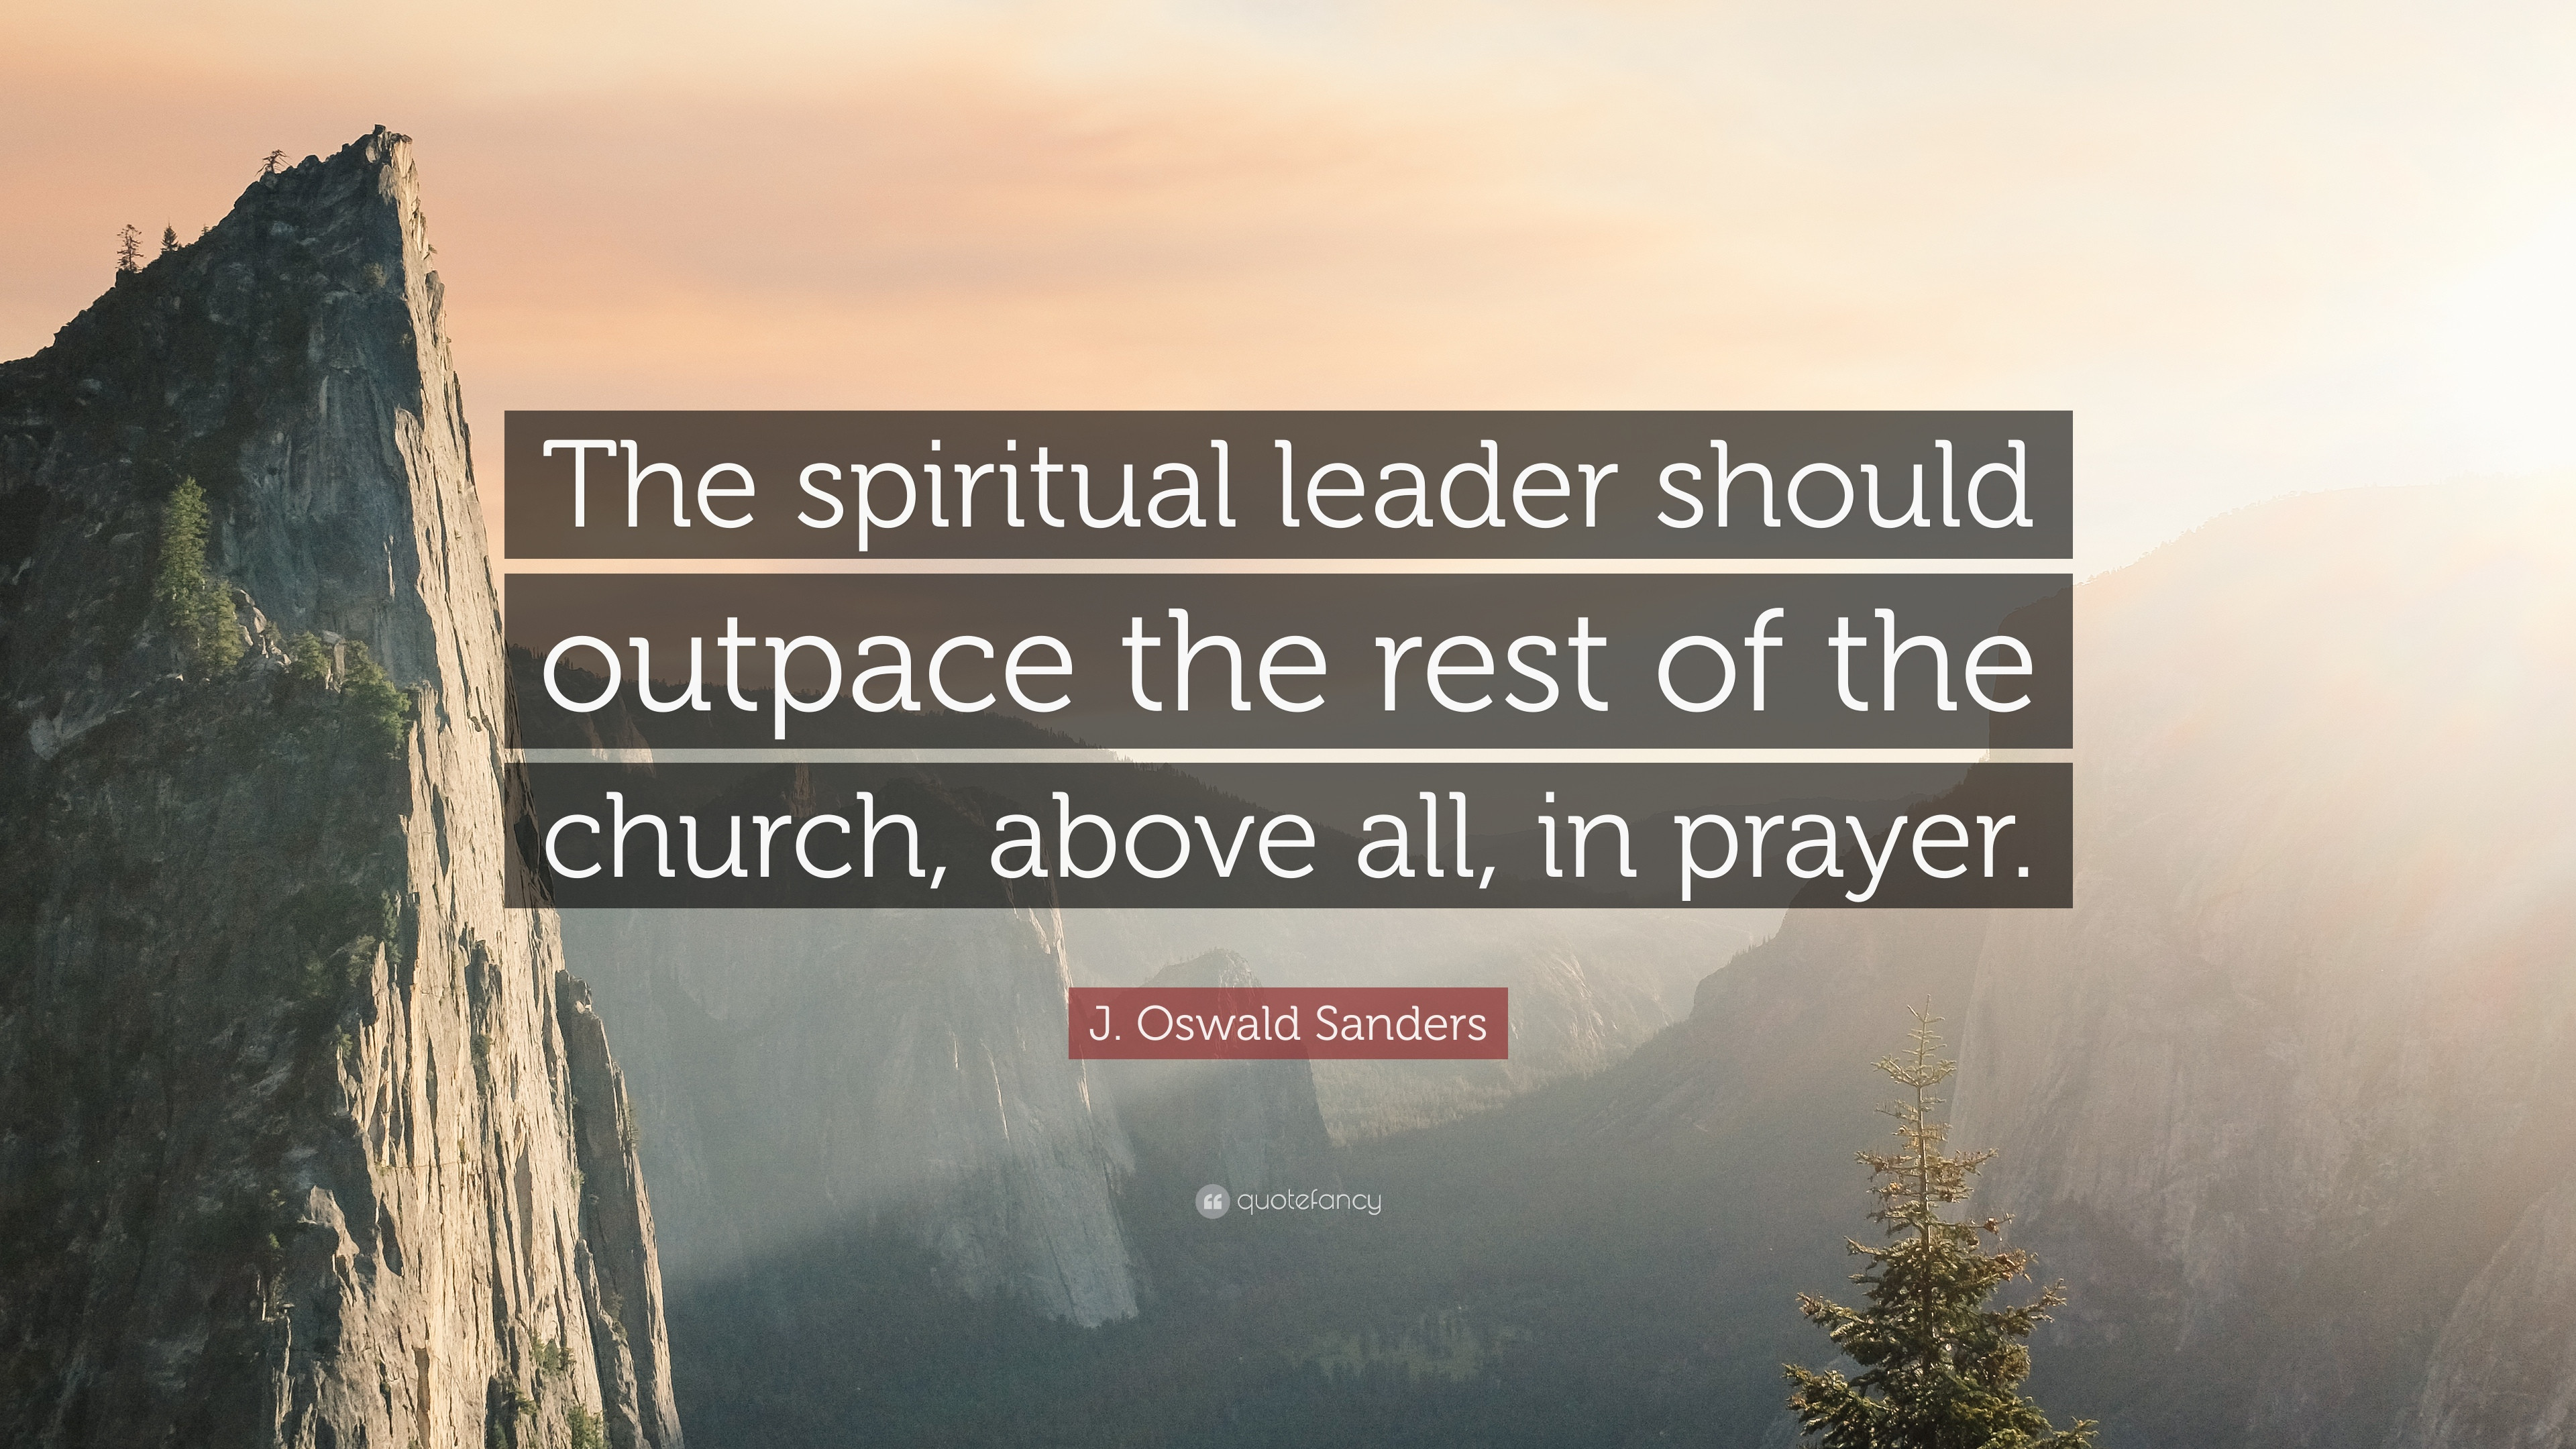 Spiritual Leadership Quotes
 J Oswald Sanders Quotes 61 wallpapers Quotefancy